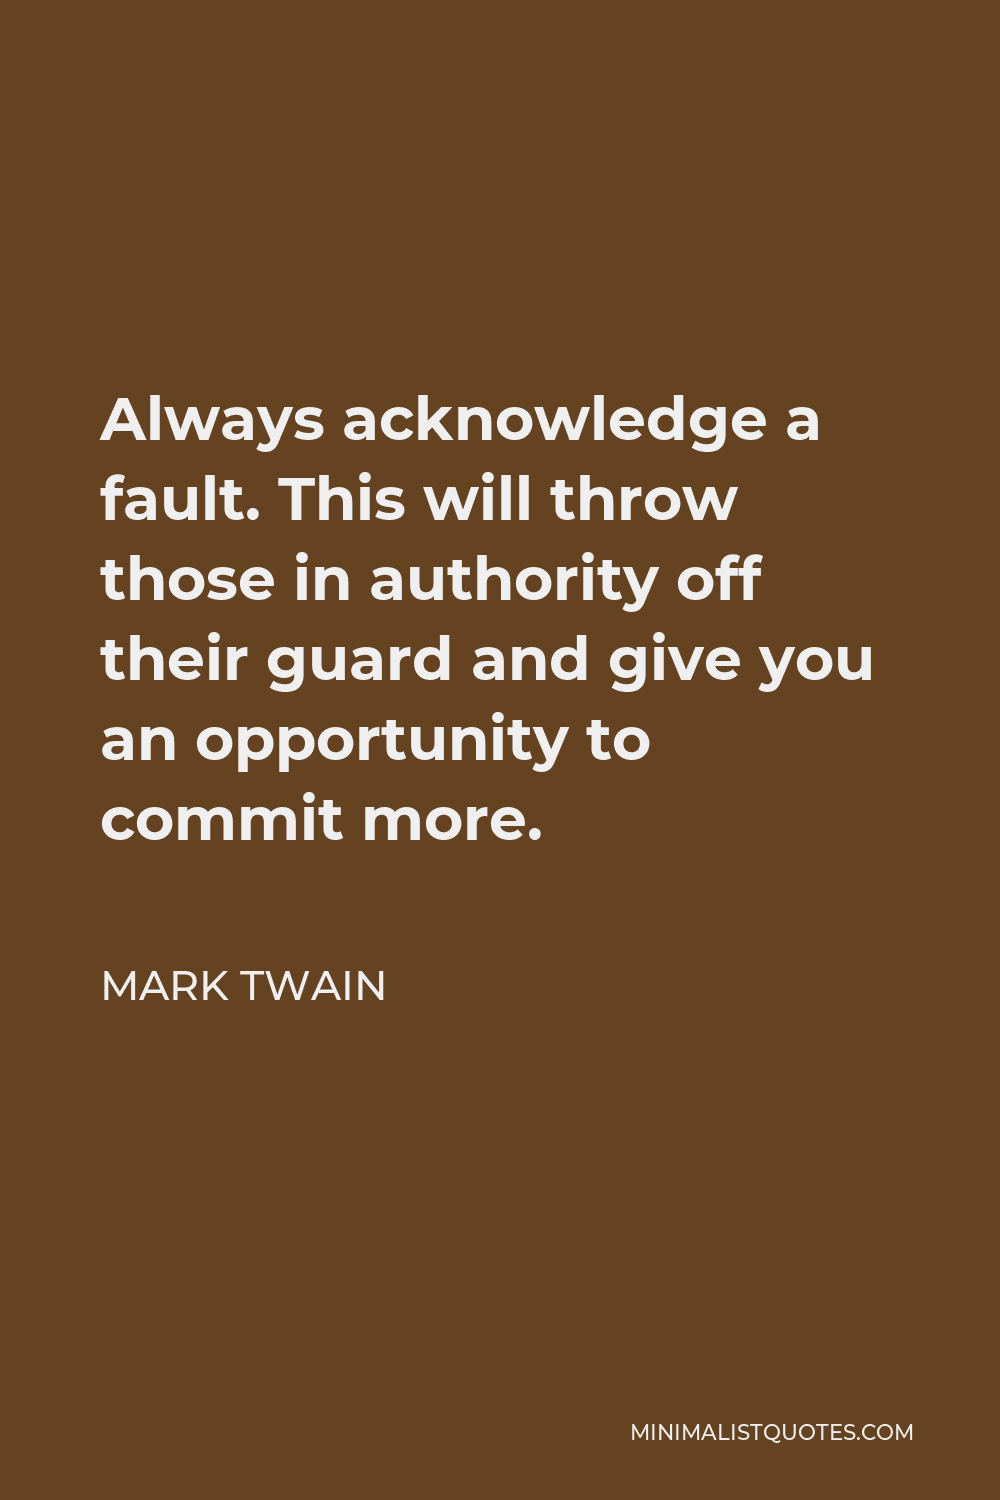 Mark Twain Quote - Always acknowledge a fault. This will throw those in authority off their guard and give you an opportunity to commit more.